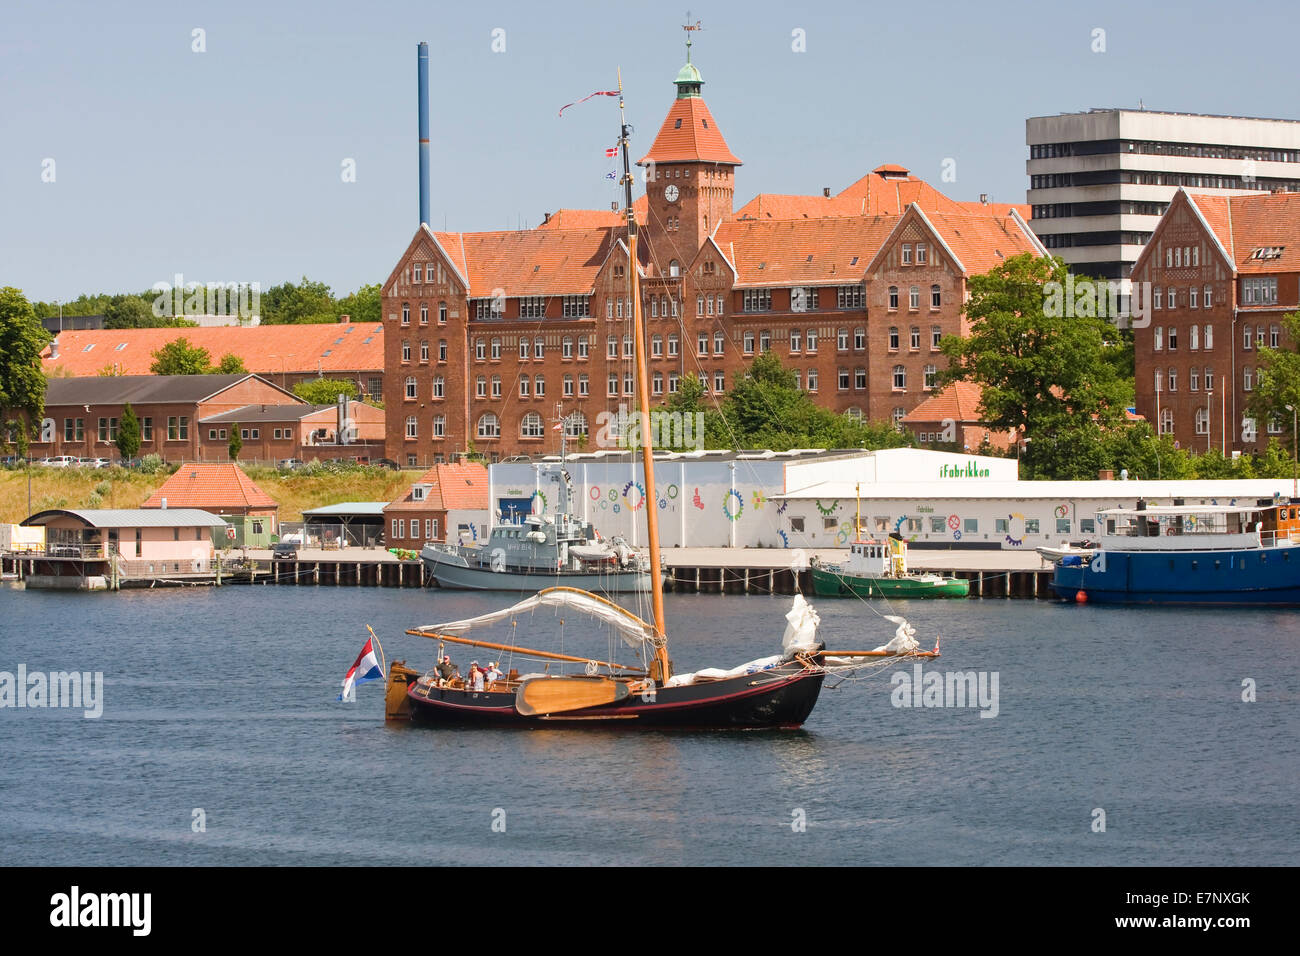 Building, office building, office house, outside, Denmark, Danish, buildings, constructions, bodies of water, harbor basins, por Stock Photo